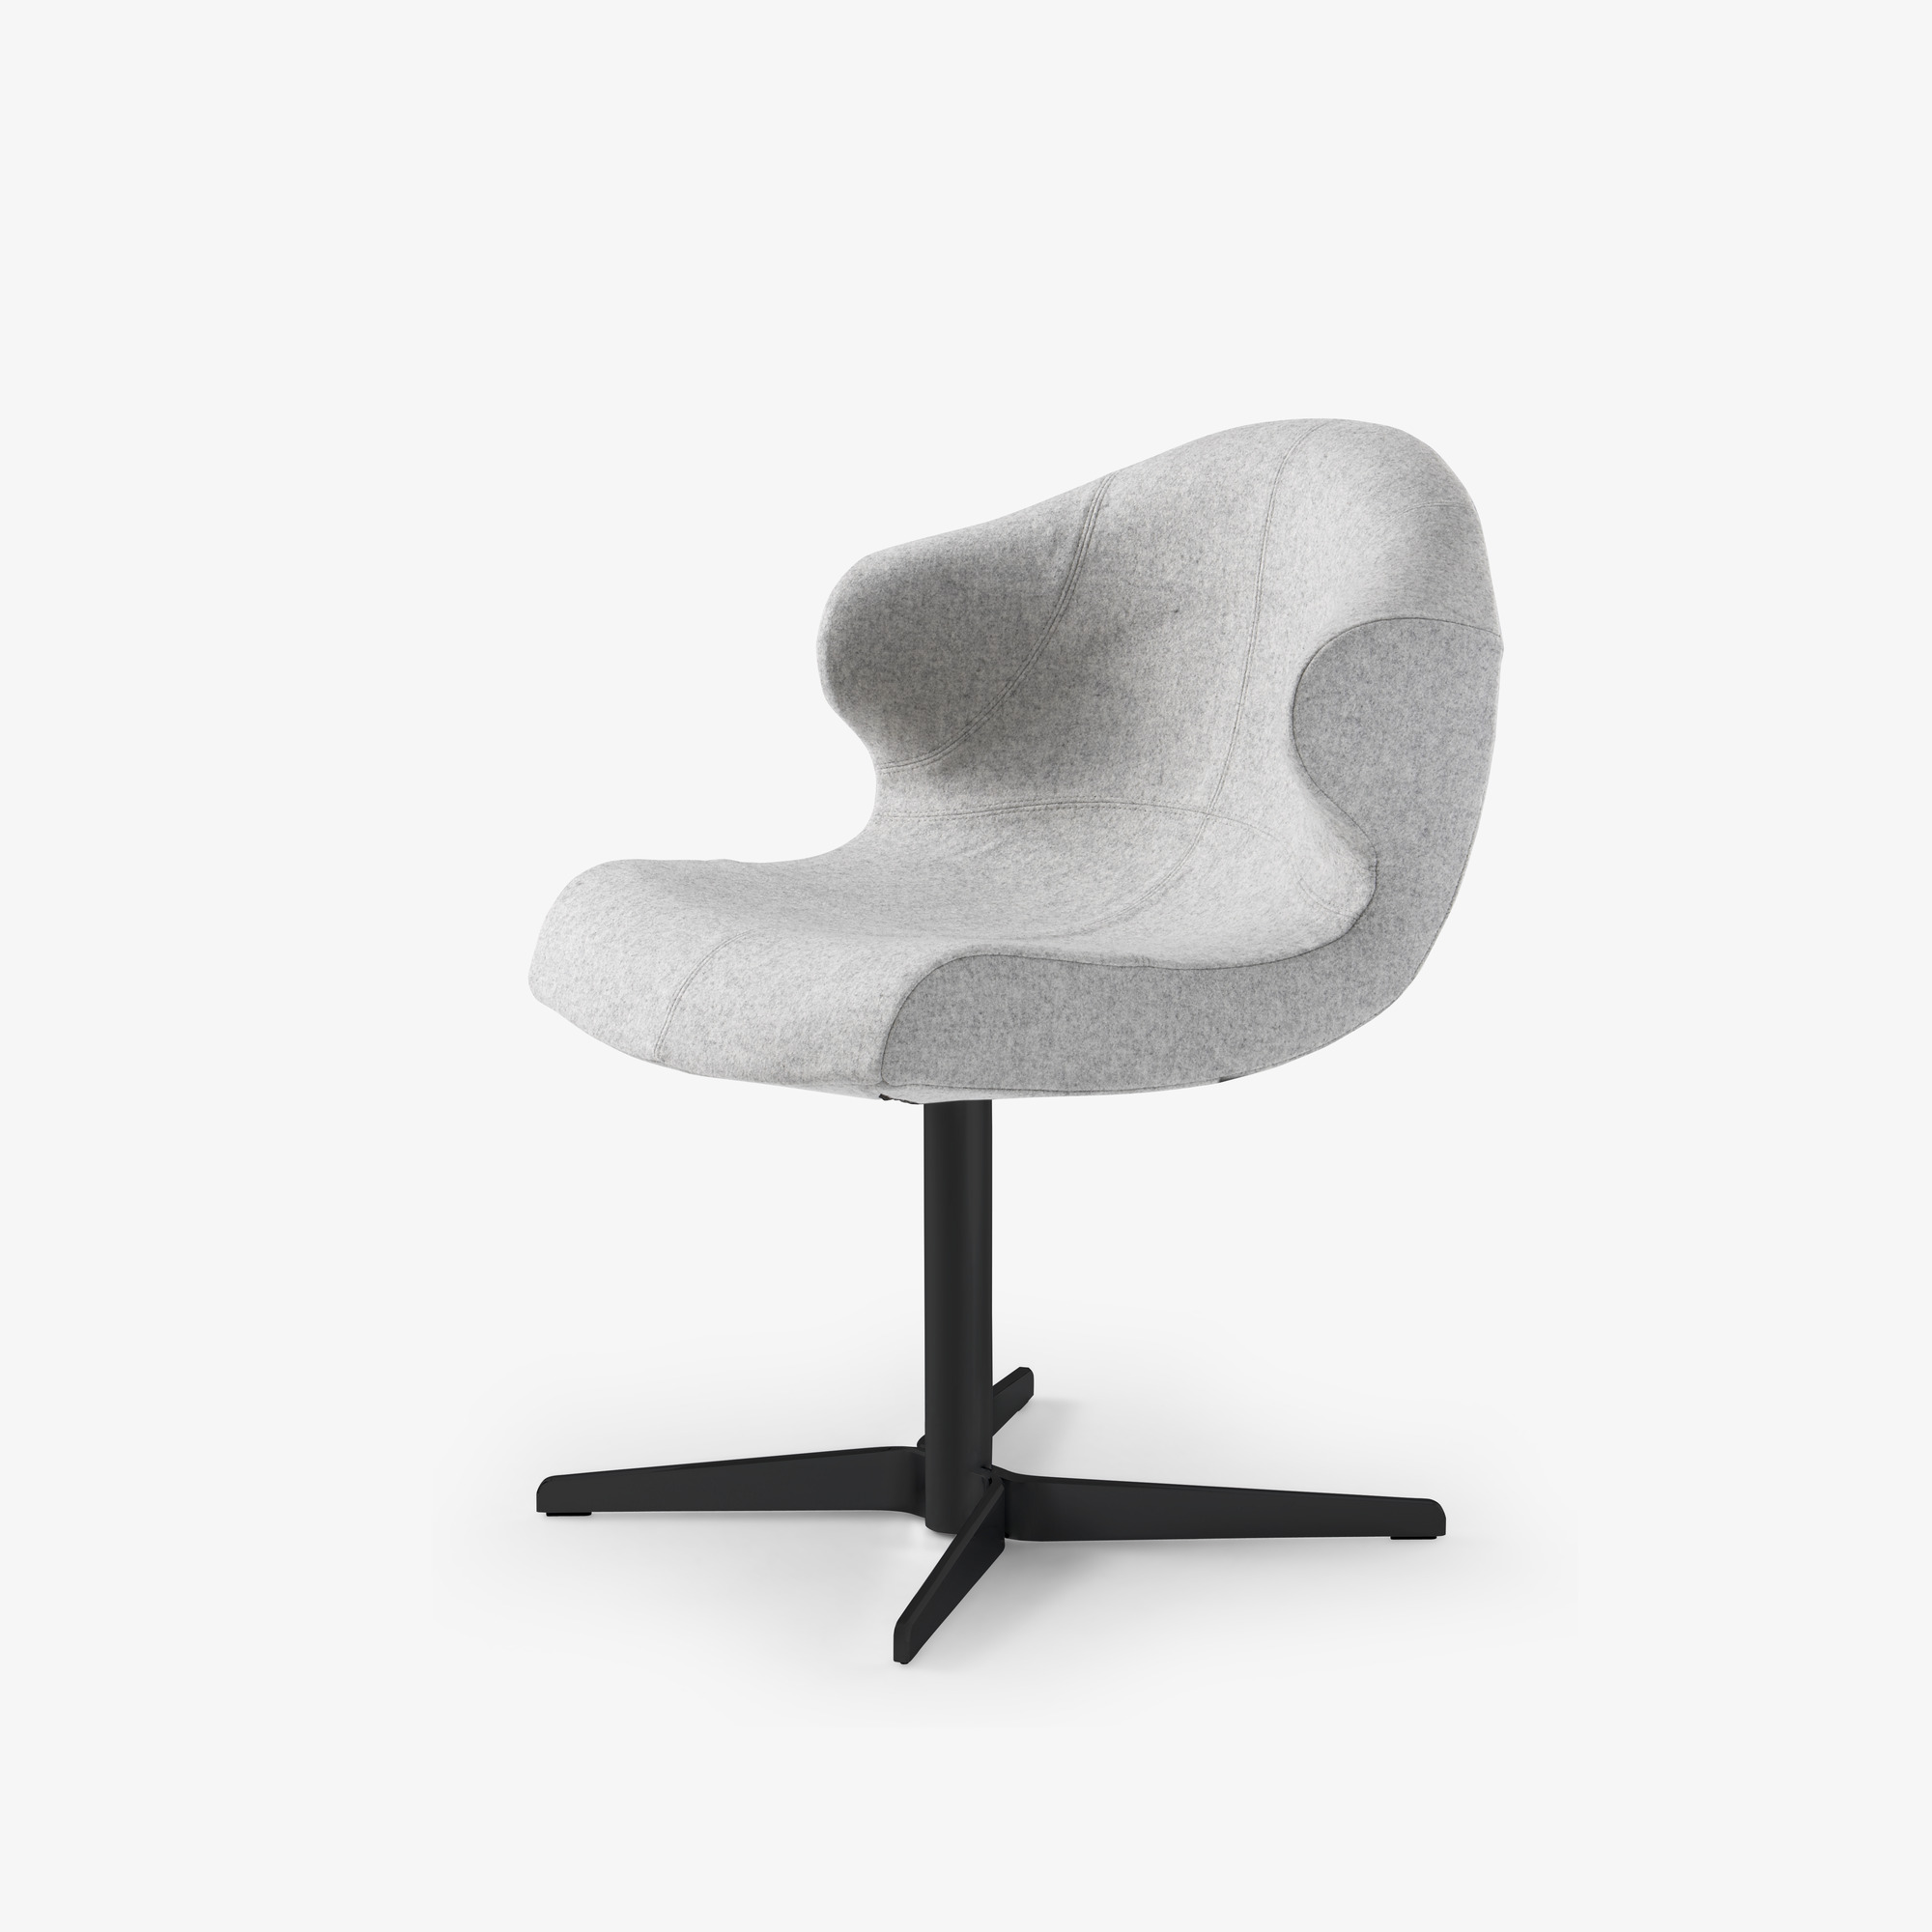 Image Alster chair with arms matt black central pedestal 2